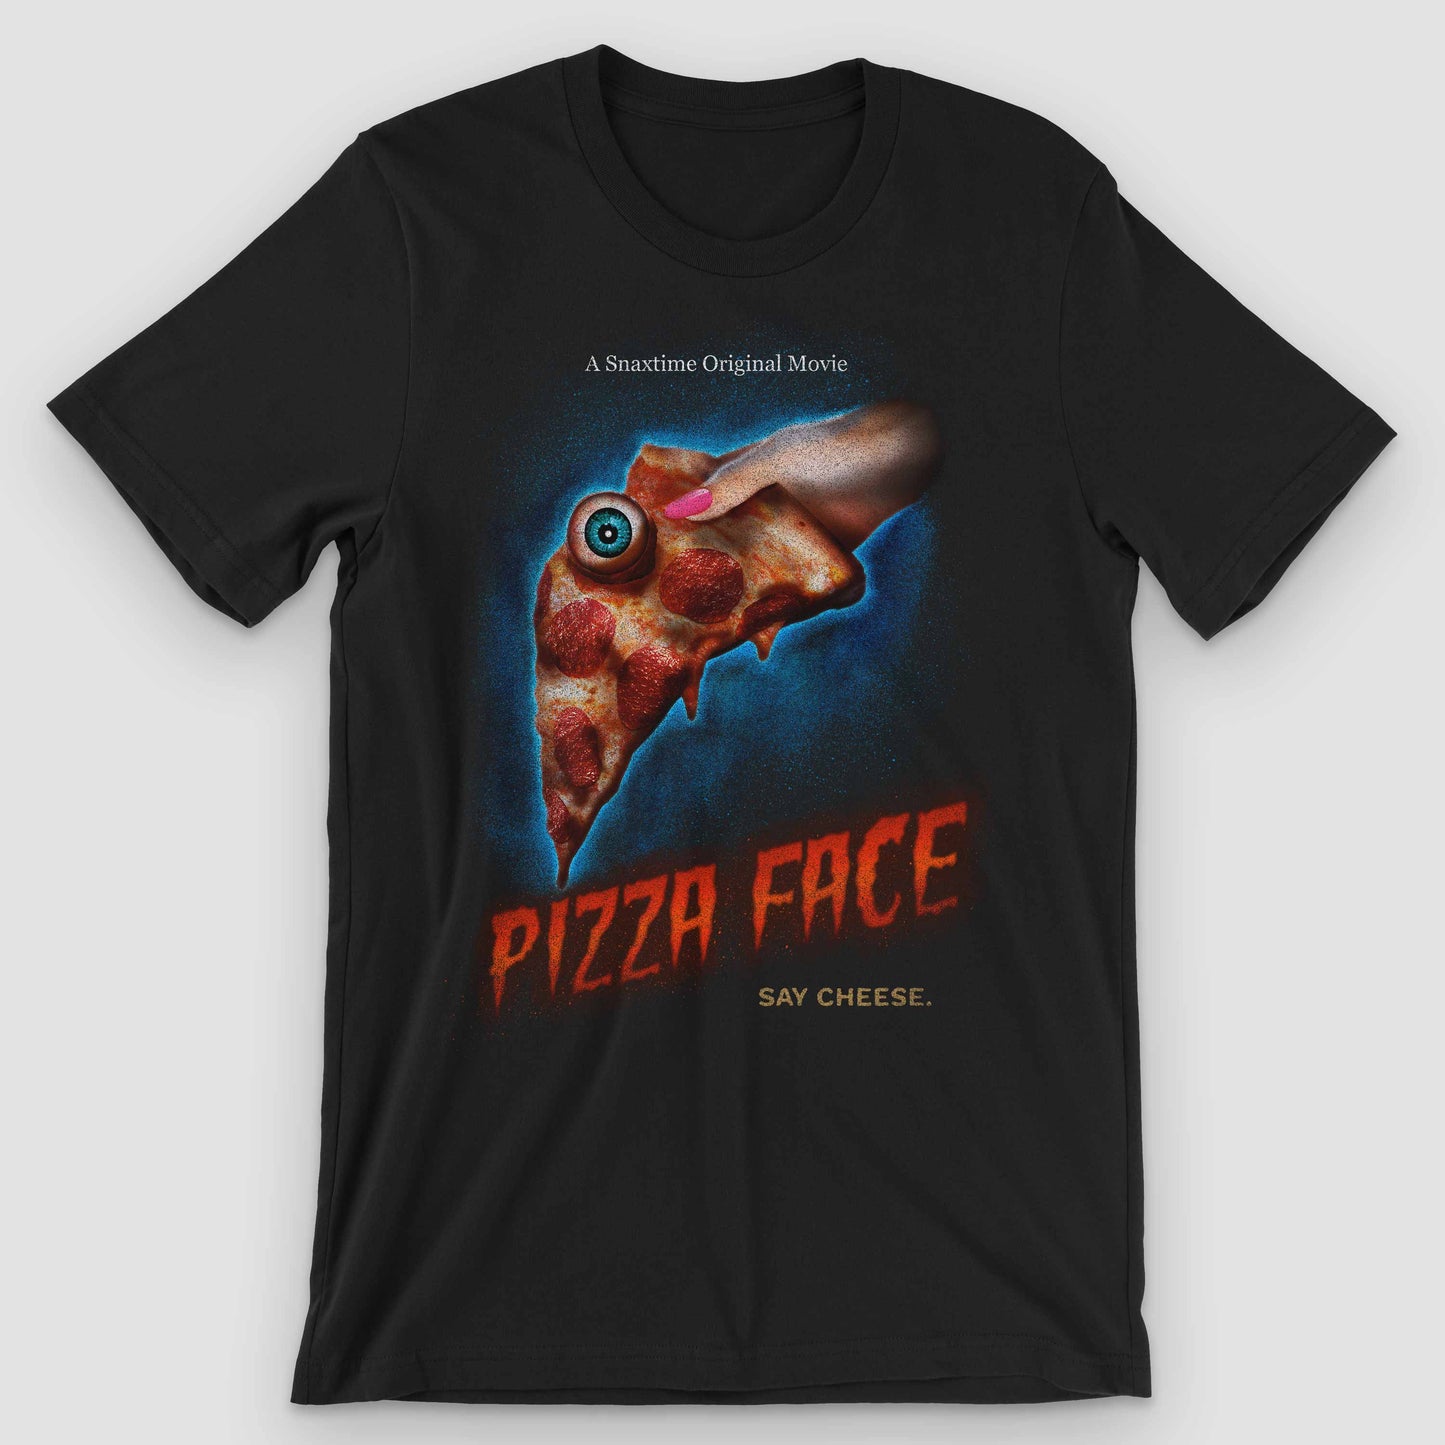 Black Pizza Face Movie Poster Graphic T-Shirt by Snaxtime